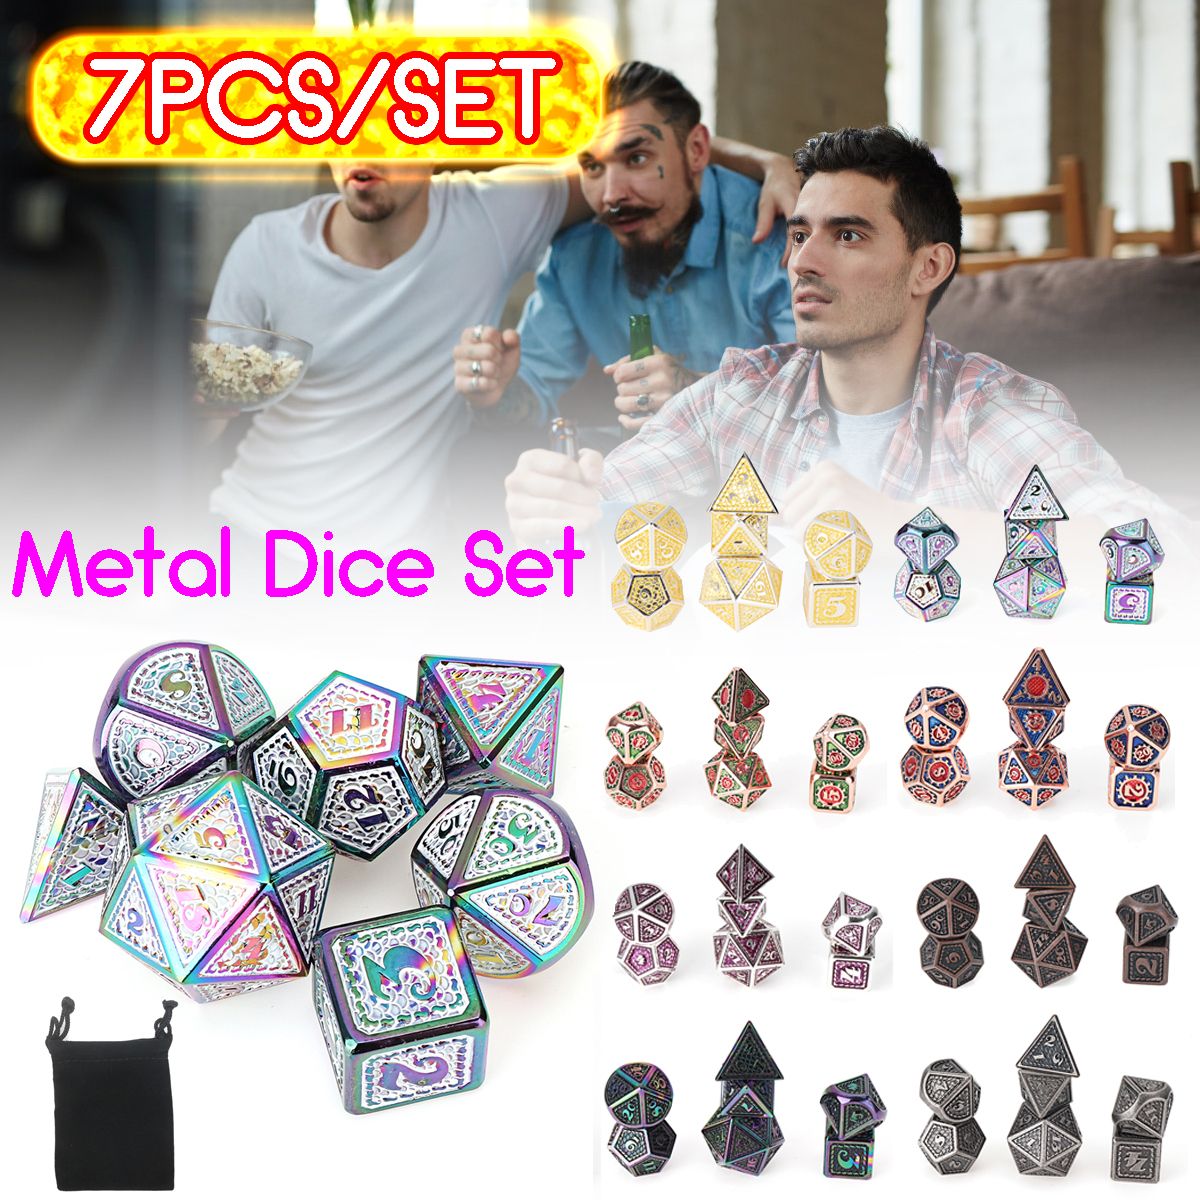 Beutiful-Color-Metal-Polyhedral-Dice-Multi-side-Dice-Set-For-DND-RPG-MTG-Role-Playing-Board-Game-Wit-1716609